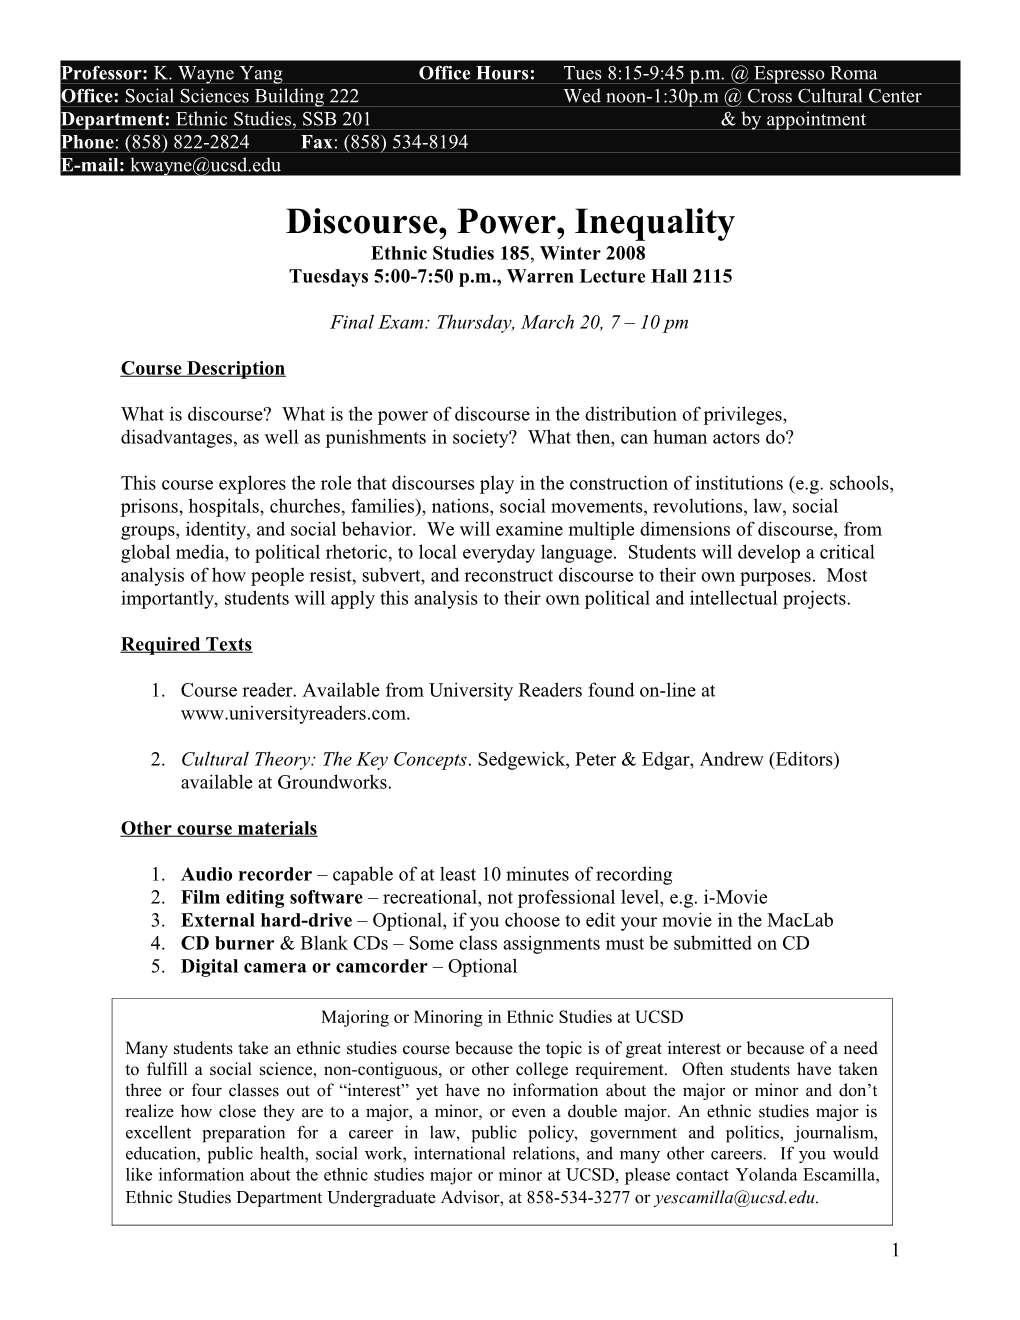 Discourse, Power, Inequality